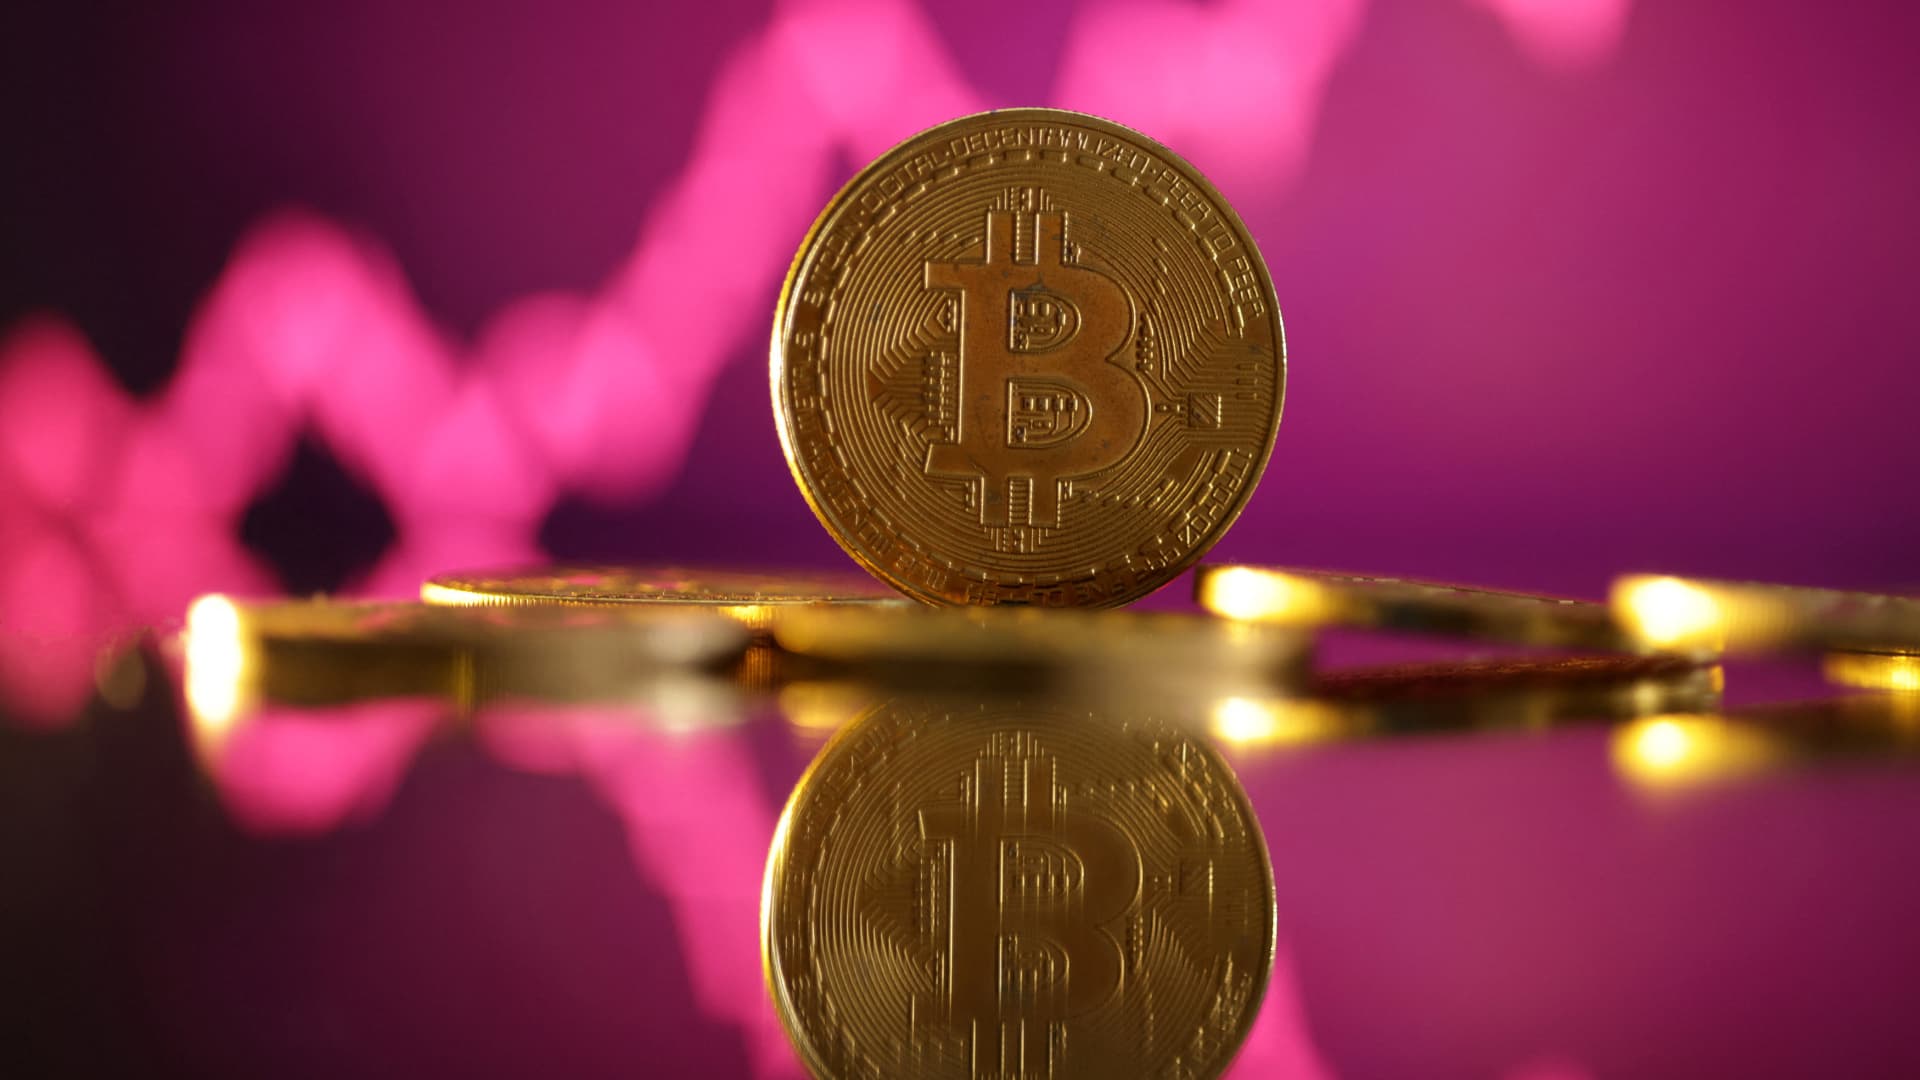 Cryptocurrencies rebound with risk assets Friday after two down days